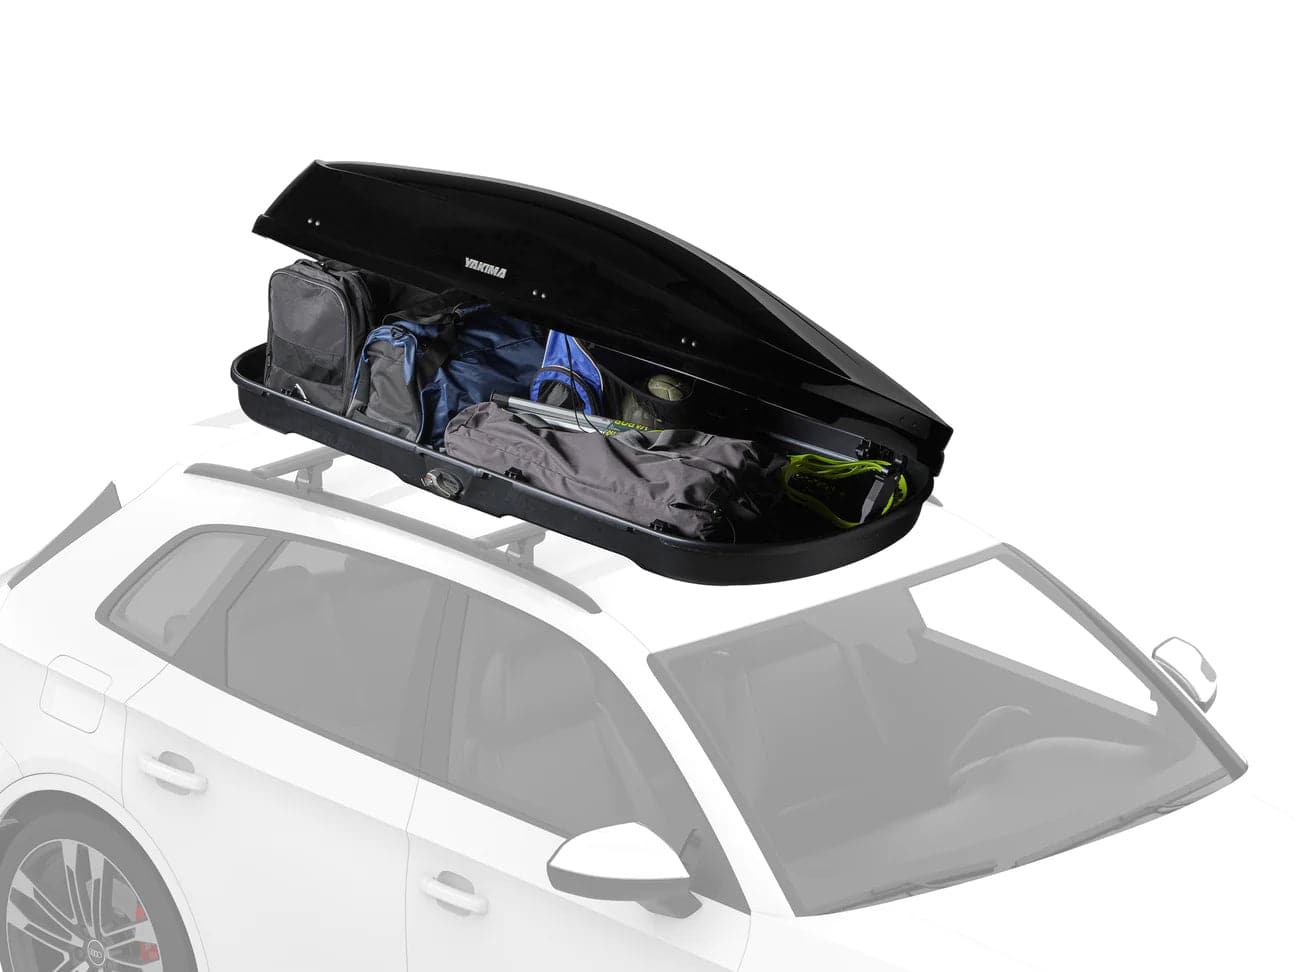 Featuring the GrandTour 18 cargo box manufactured by Yakima shown here from a second angle.